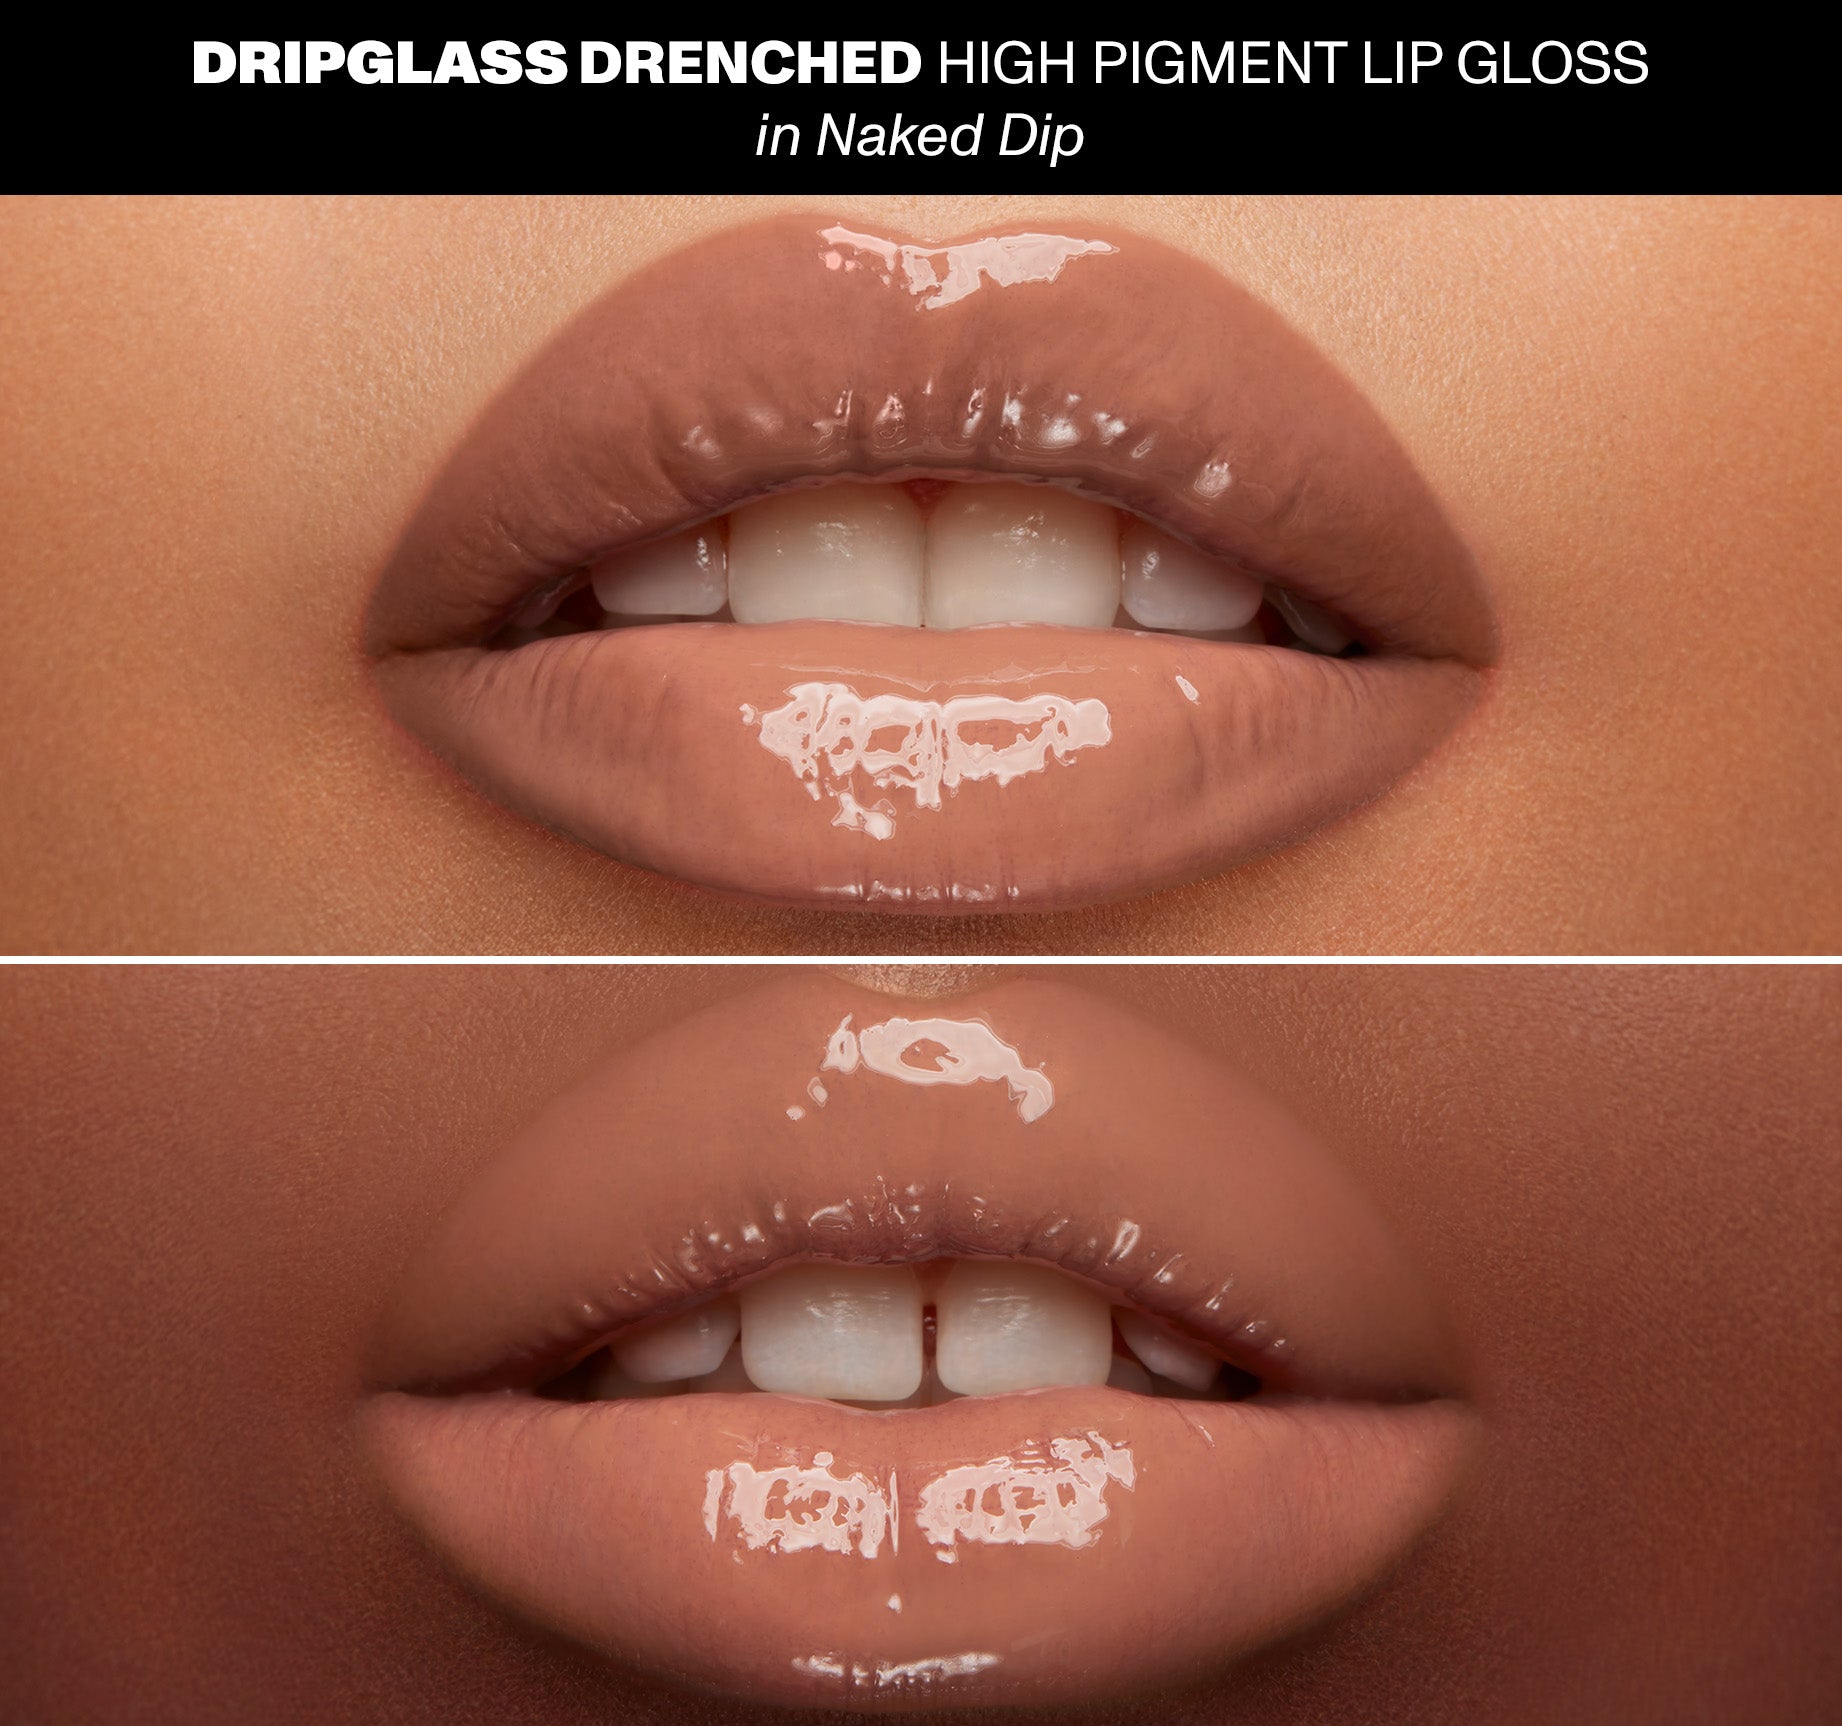 Dripglass Drenched High Pigment Lip Gloss - Naked Dip - Image 4